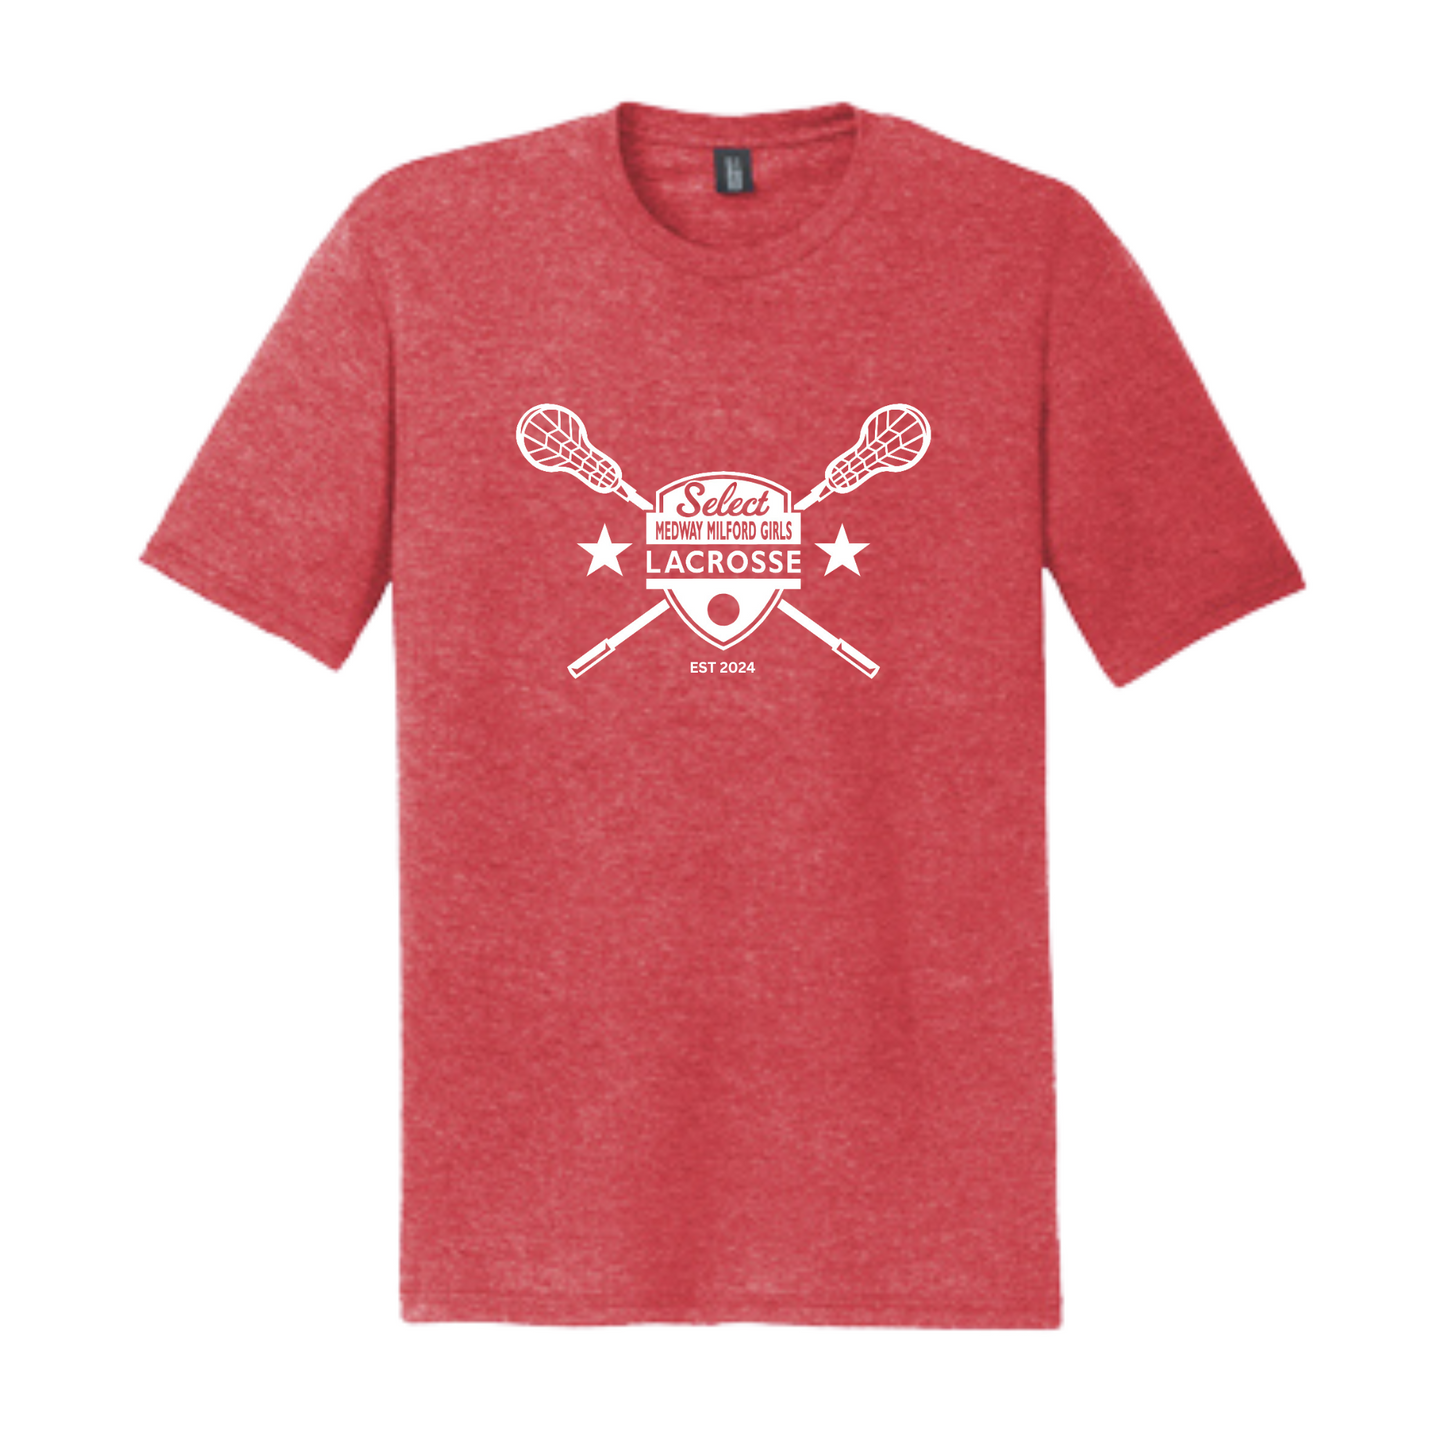 SELECT LACROSSE STICKS ADULT TEE - RED